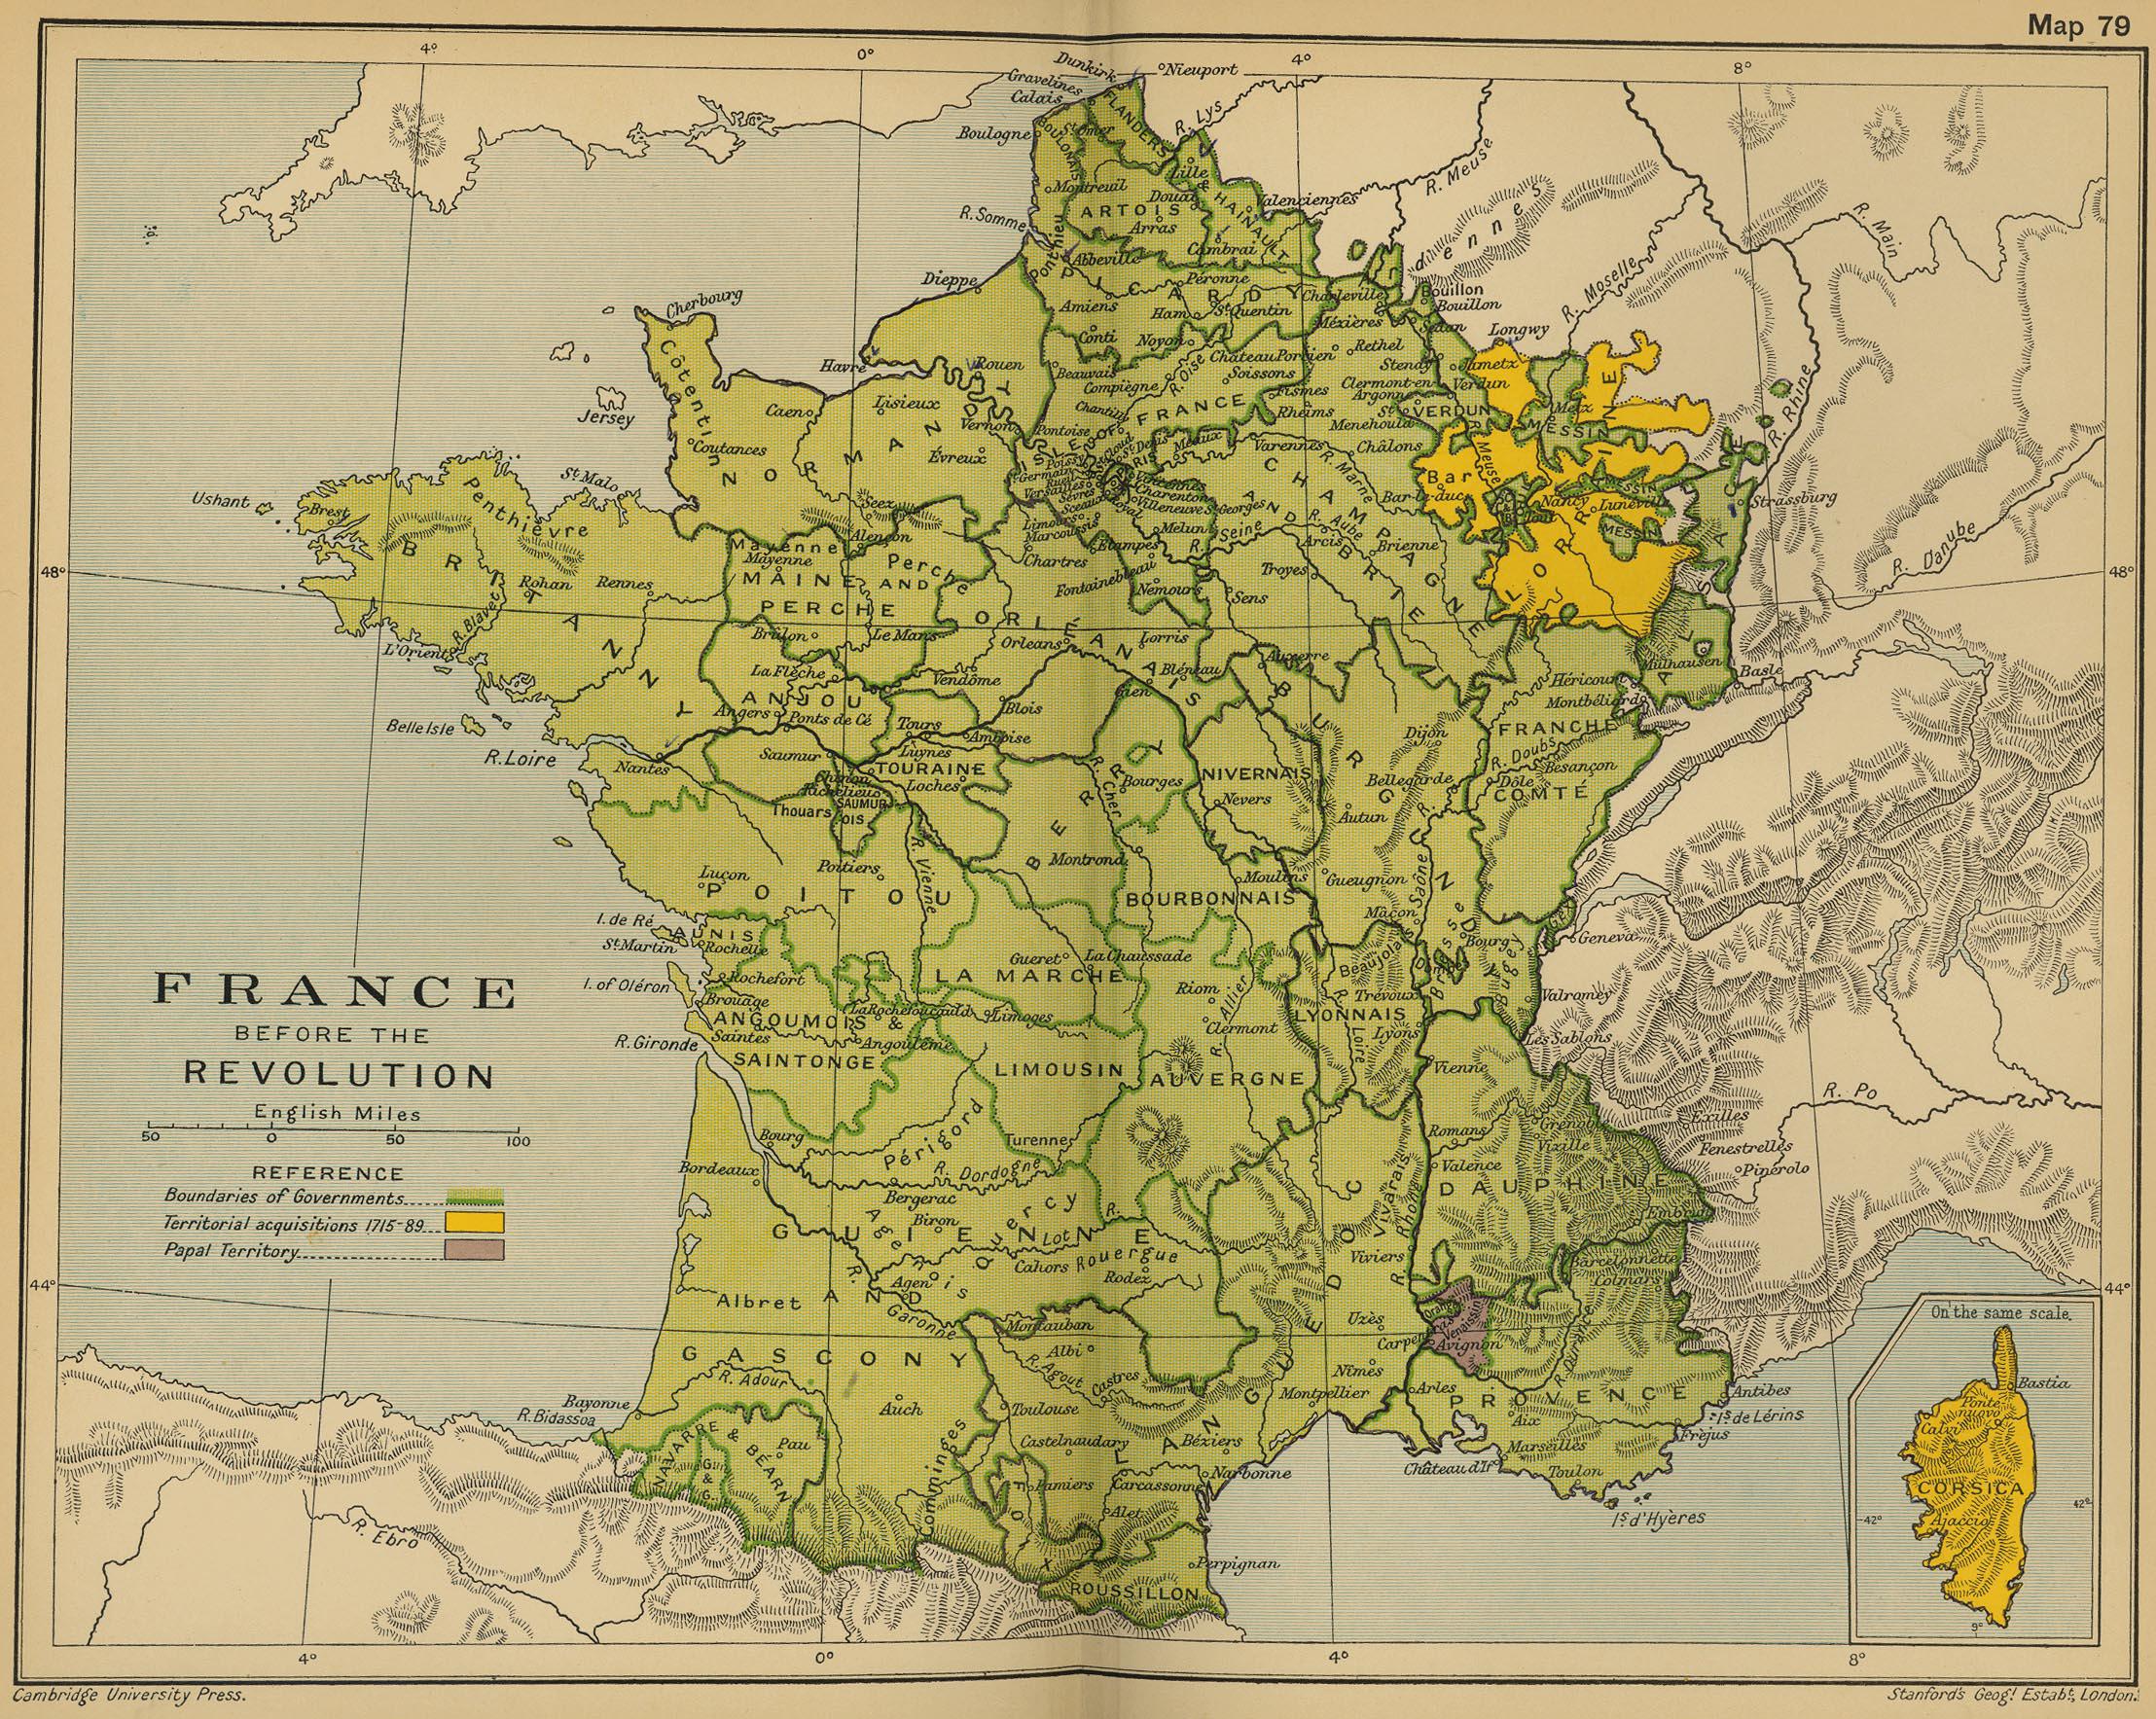 ca1770s Map of France